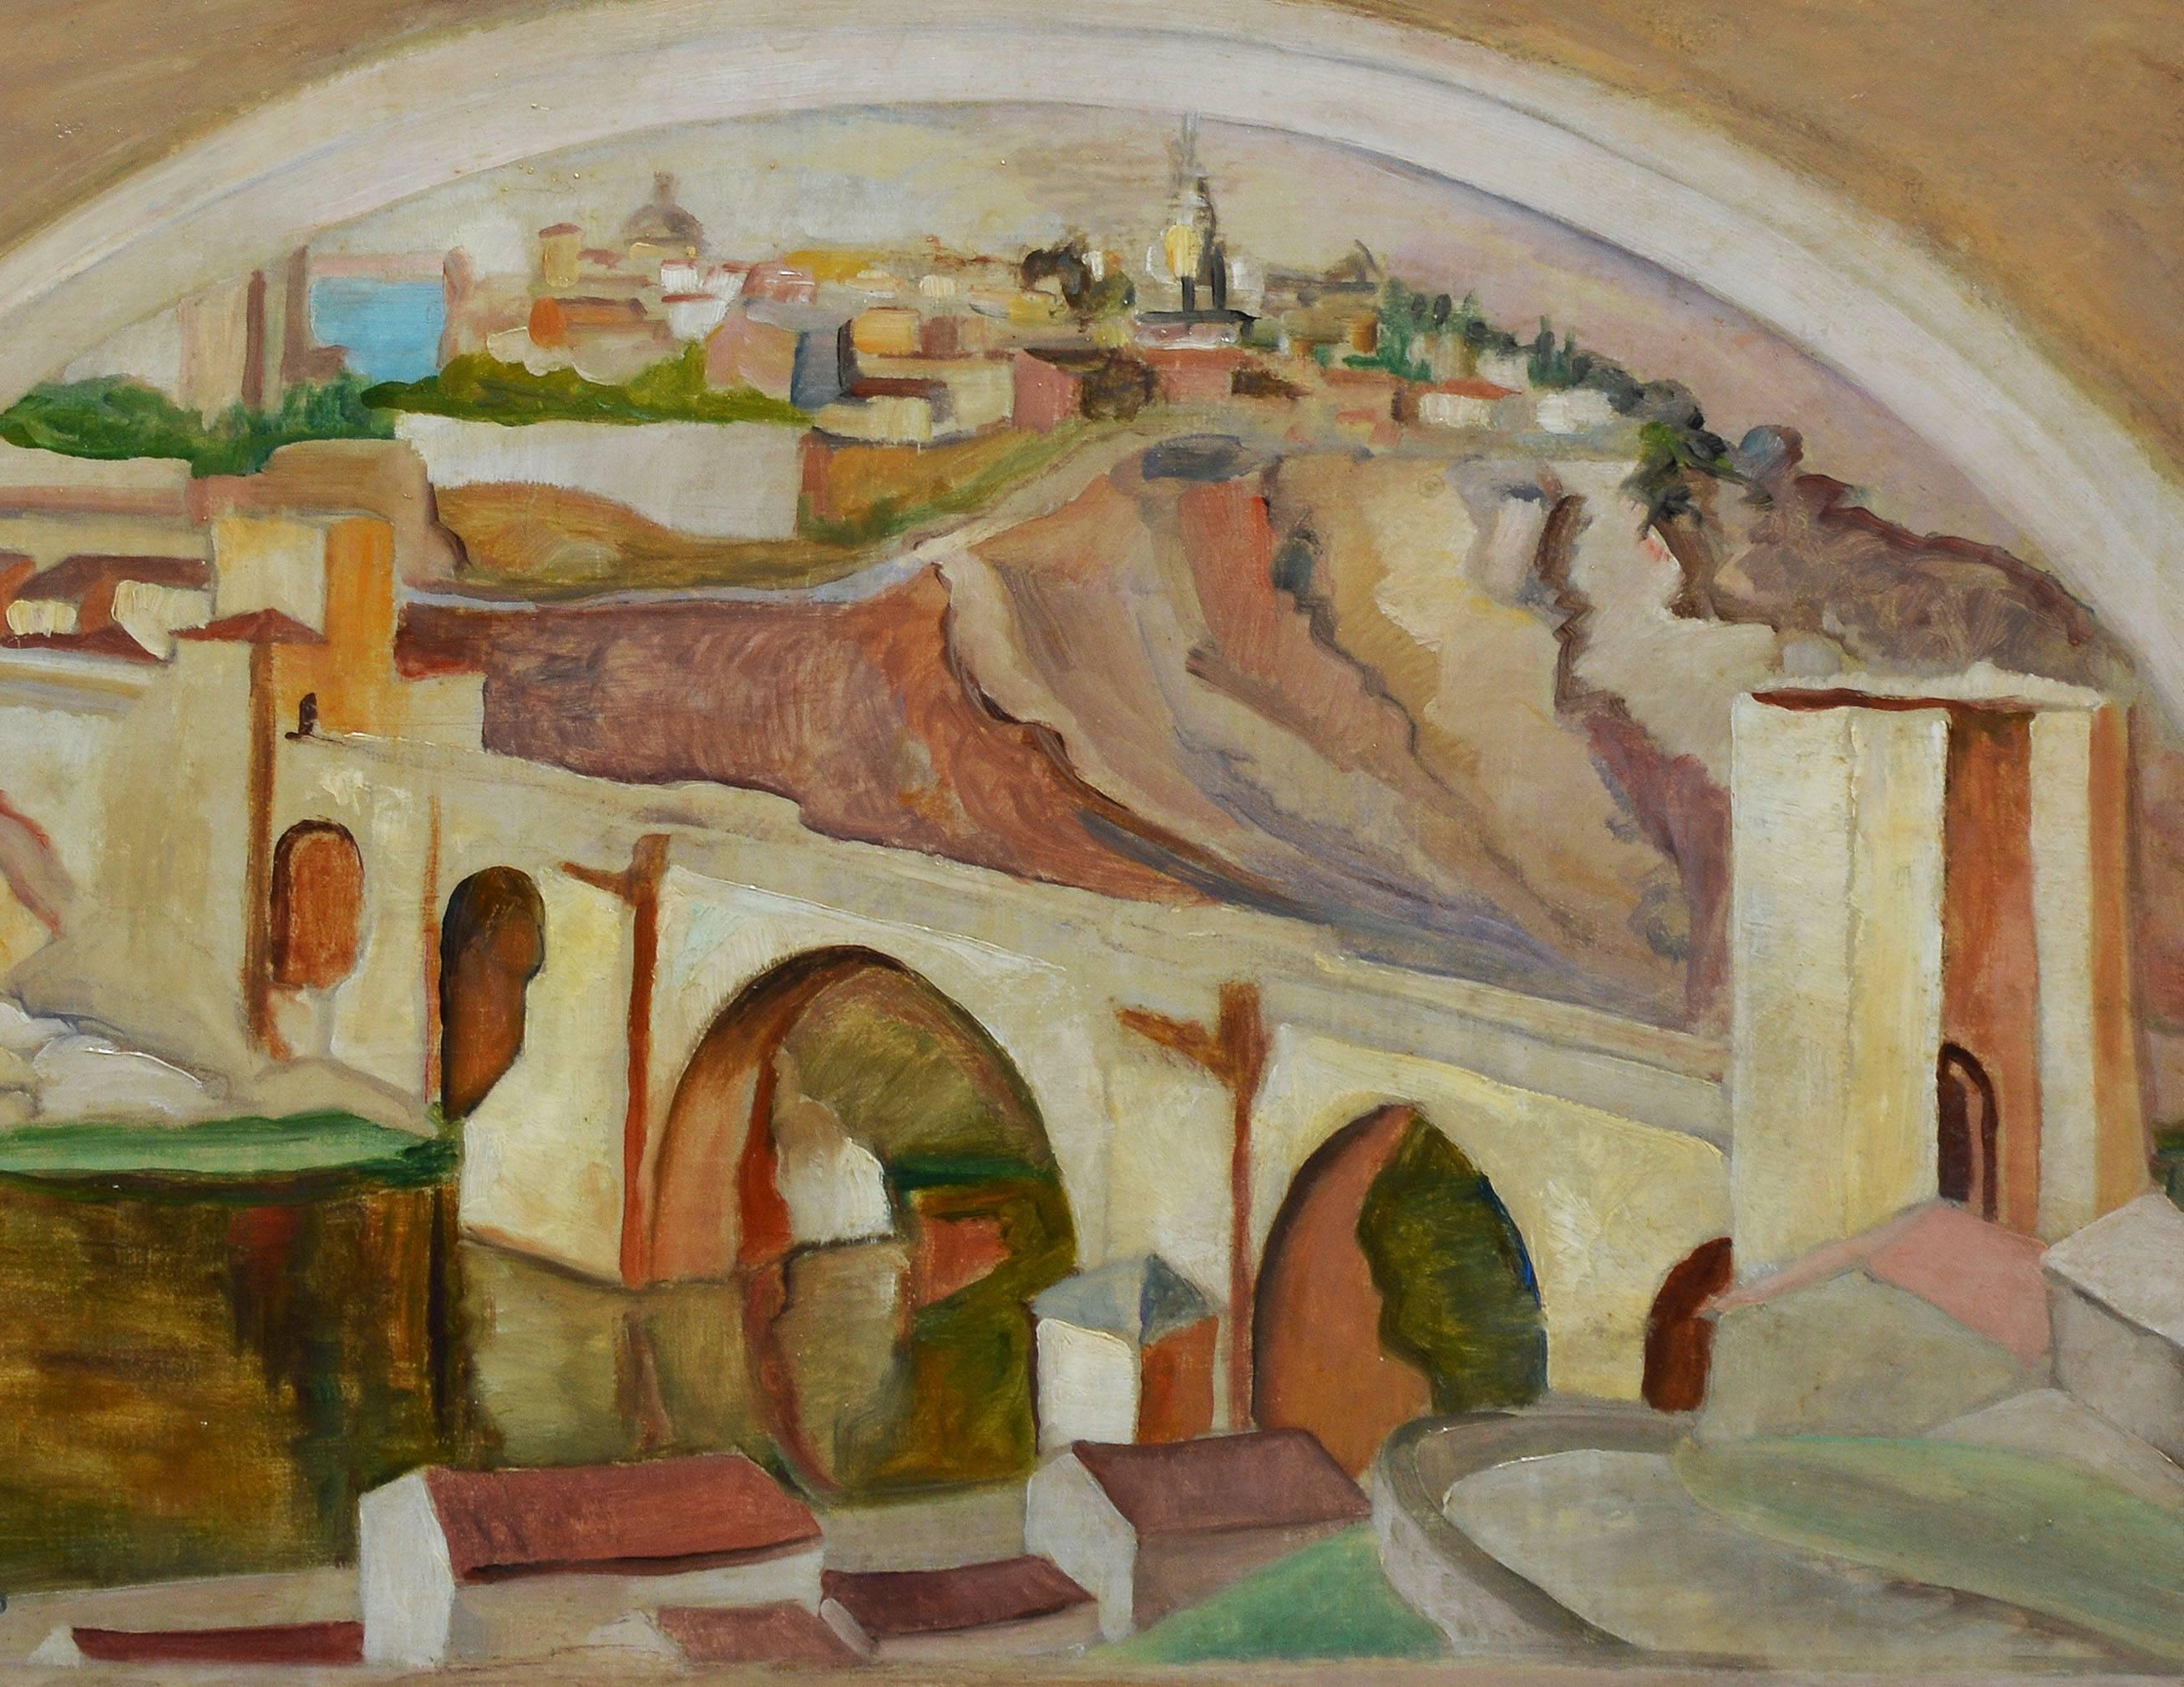 Modernist style cityscape painting of a bridge with a city in the distance.  Oil on canvas, circa 1930.  Signed illegibly lower right.  Displayed in a wood frame.  Image size, 24